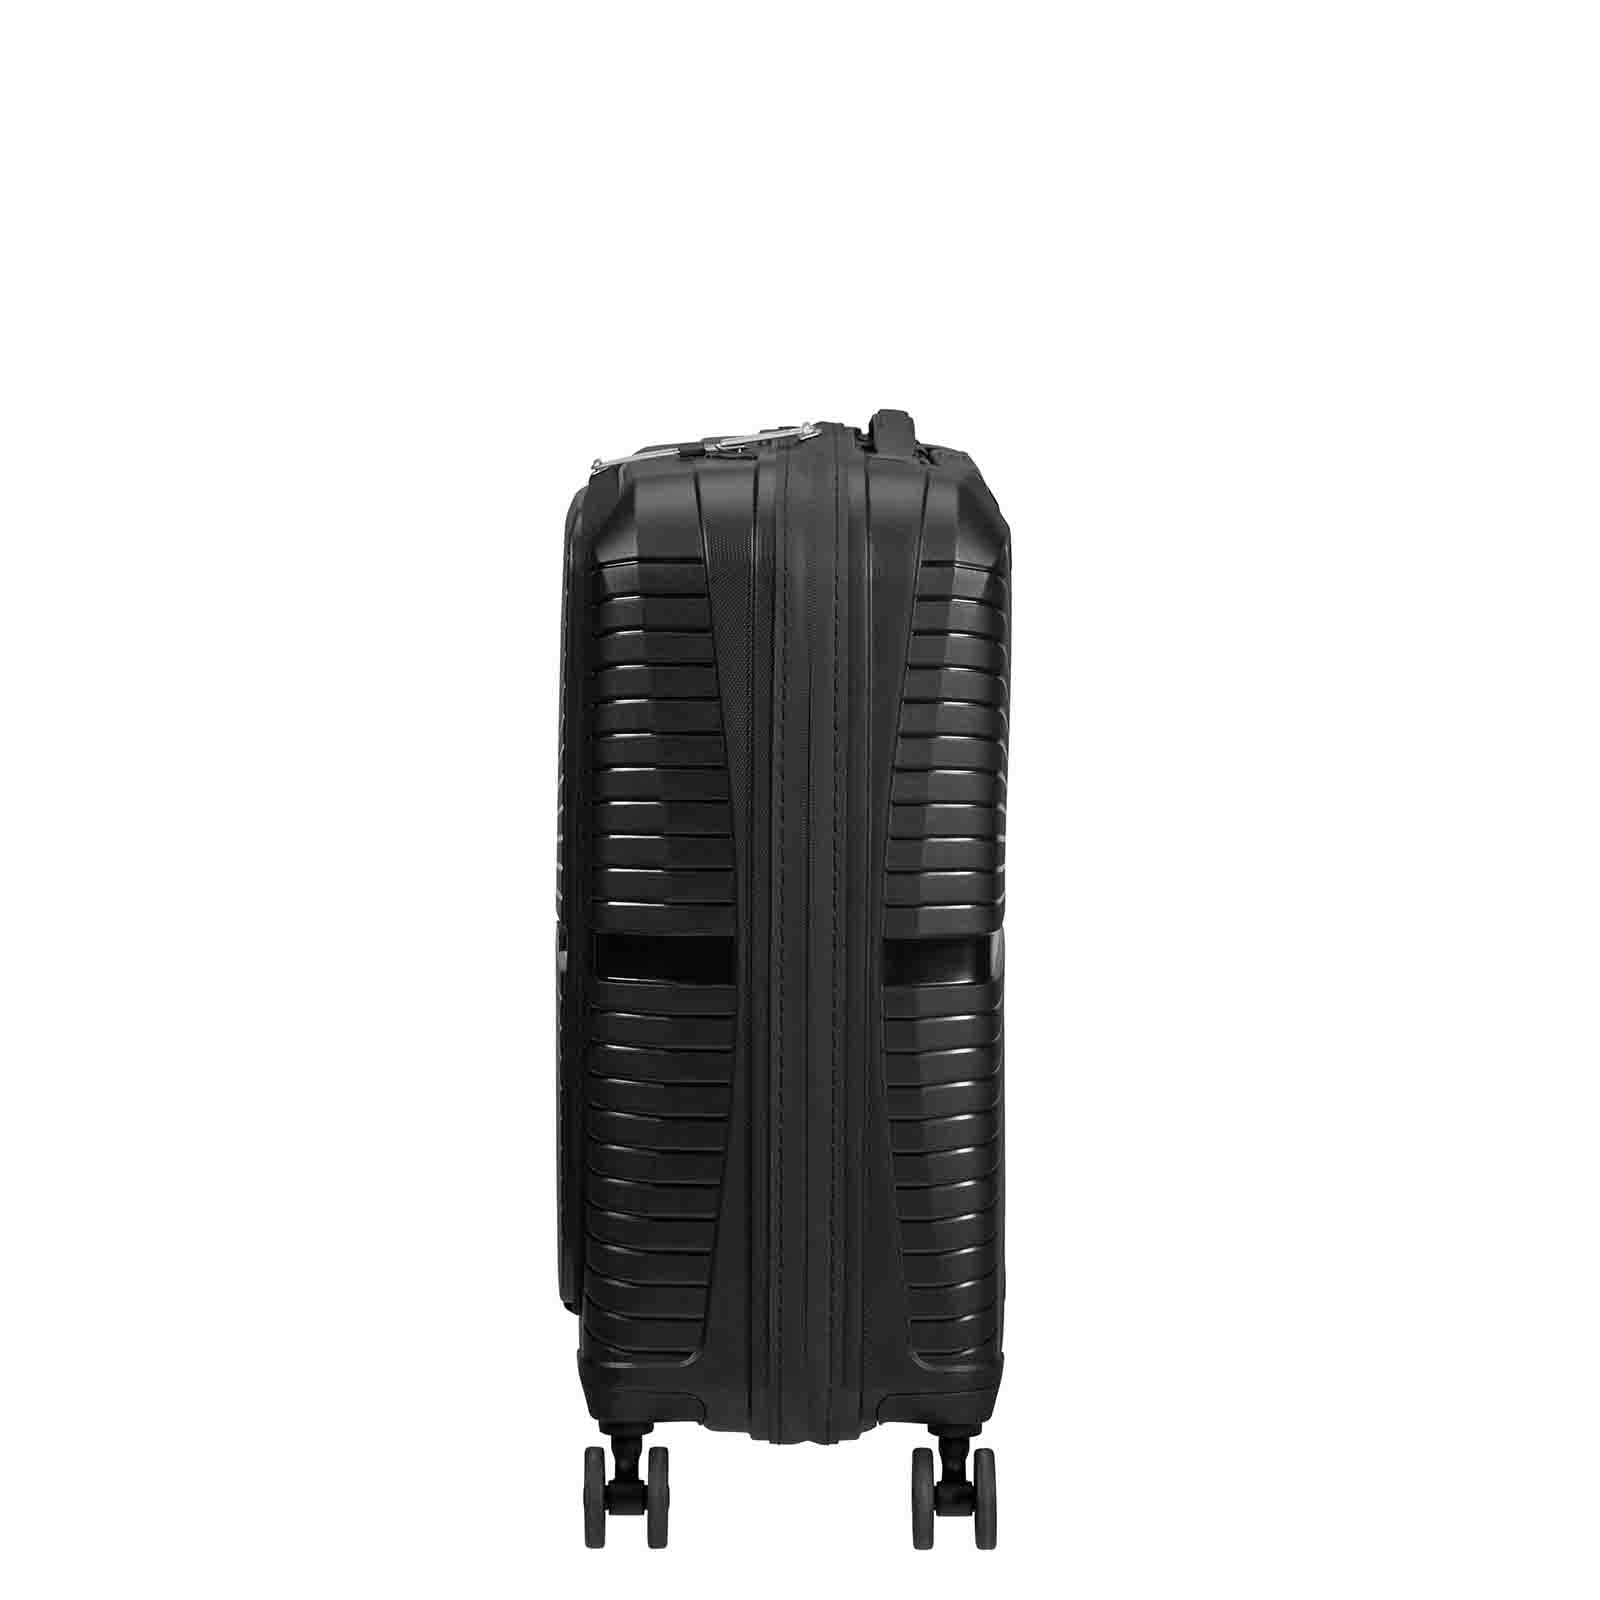 American-Tourister-Airconic-55cm-Suitcase-Front-Opening-Onyx-Black-Side-RH